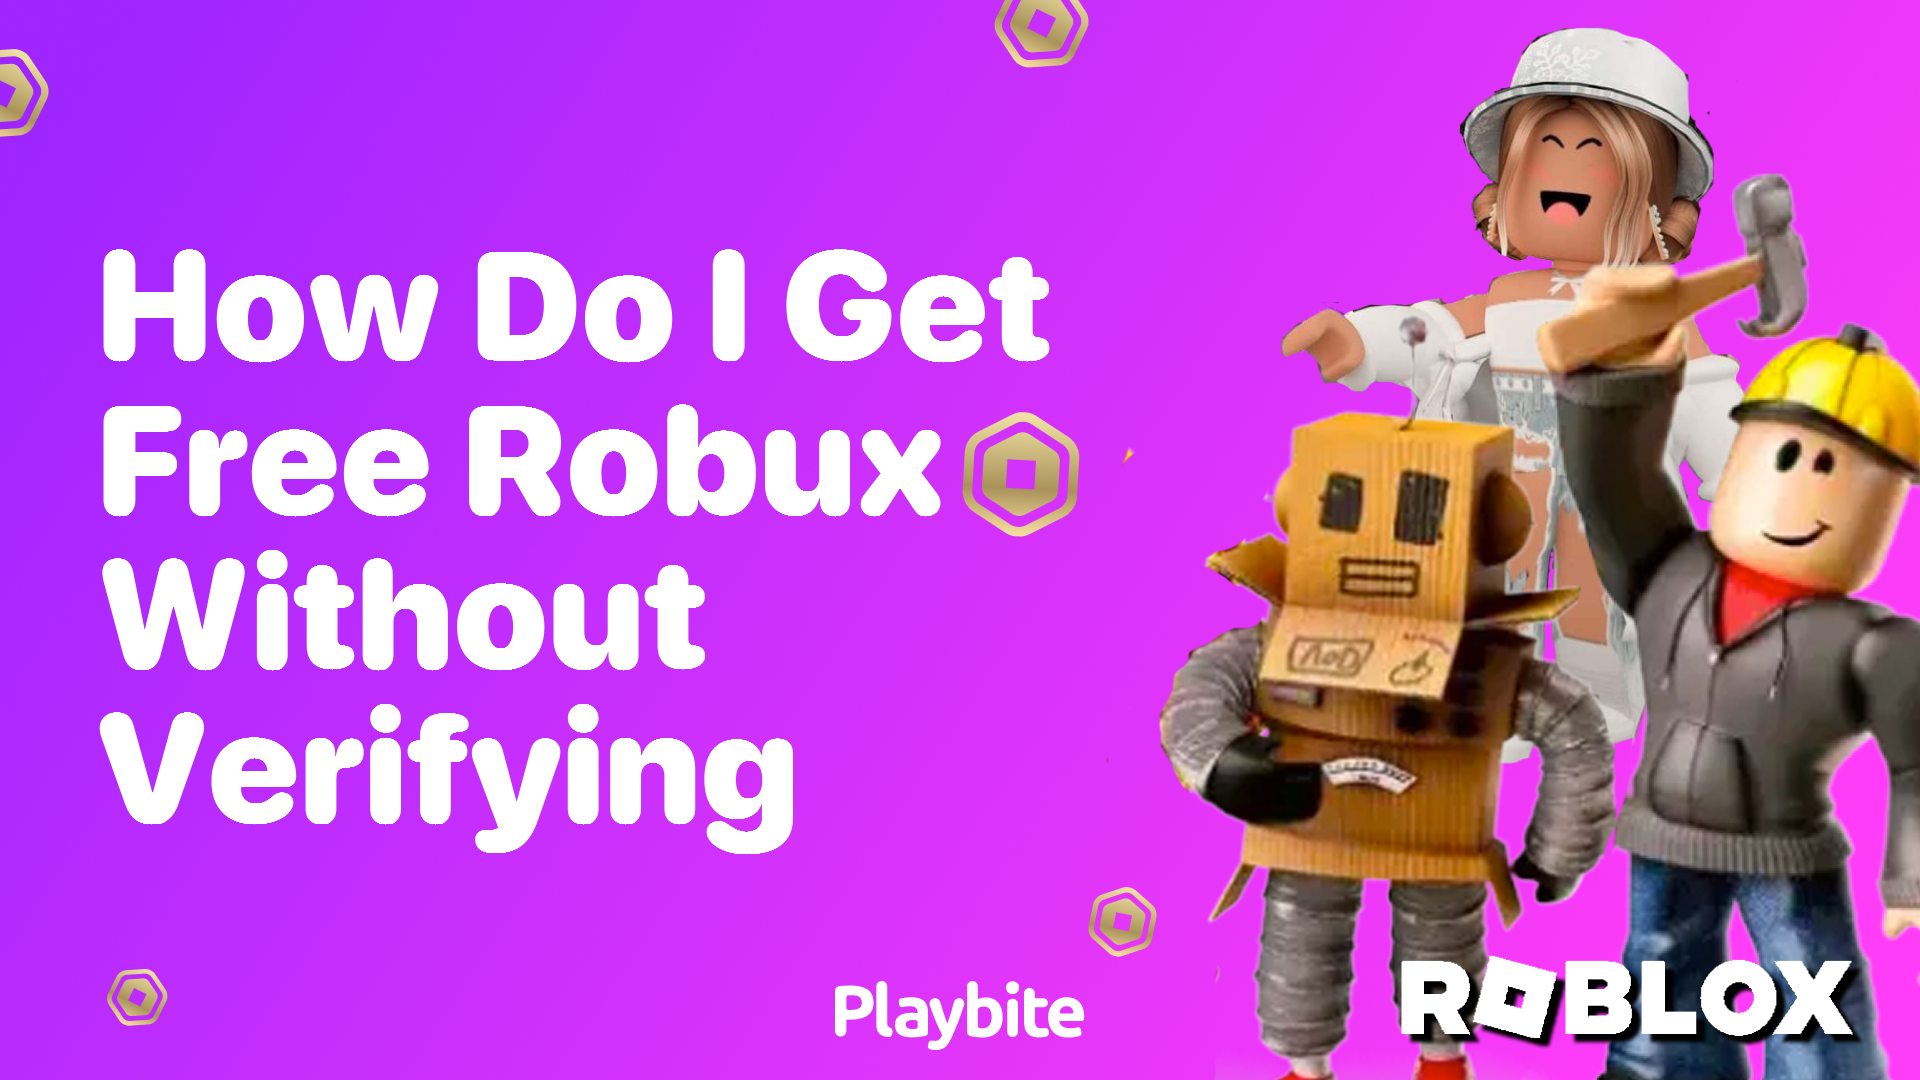 How Do I Get Free Robux Without Verifying?